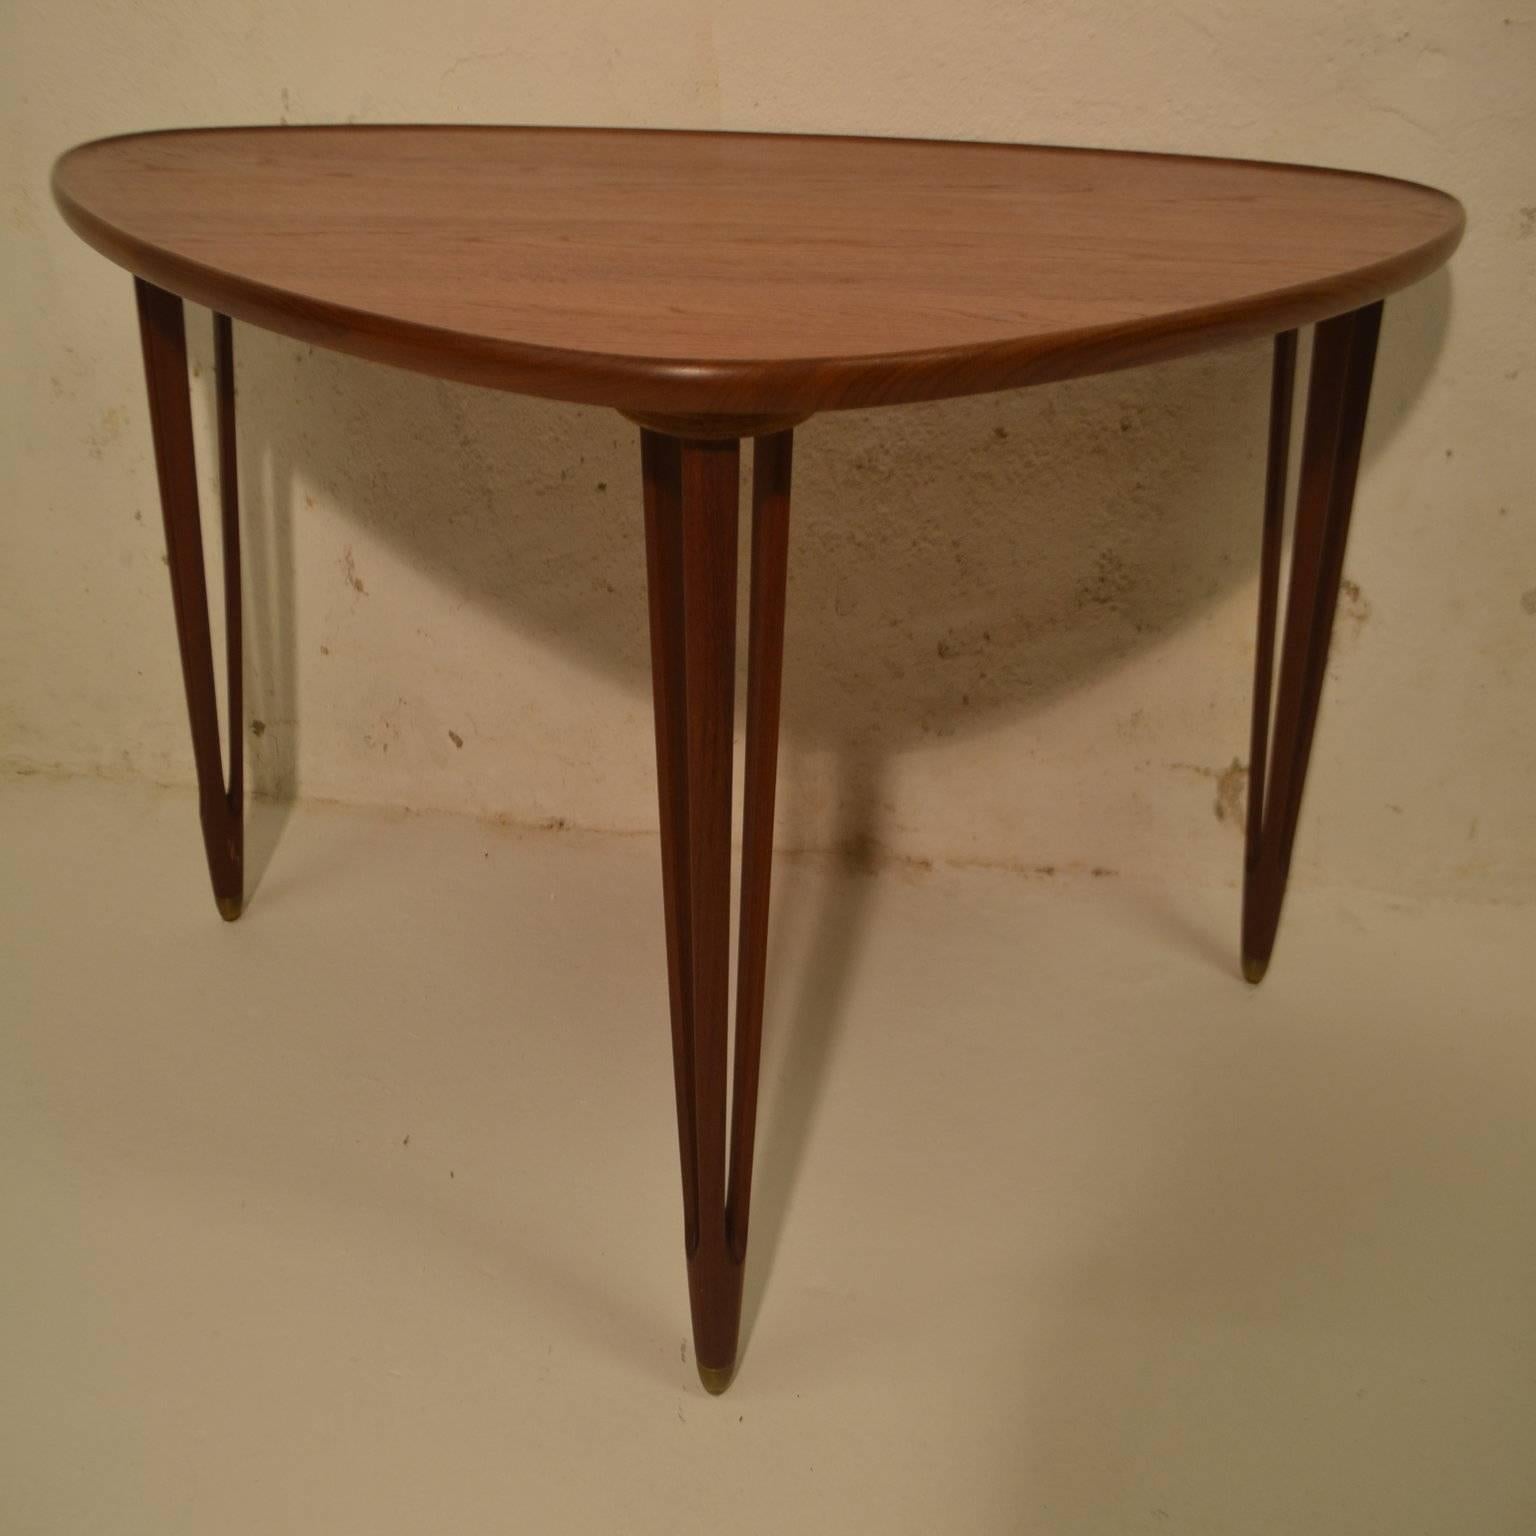 Teak coffee table manufactured by B C Mobler, Denmark.